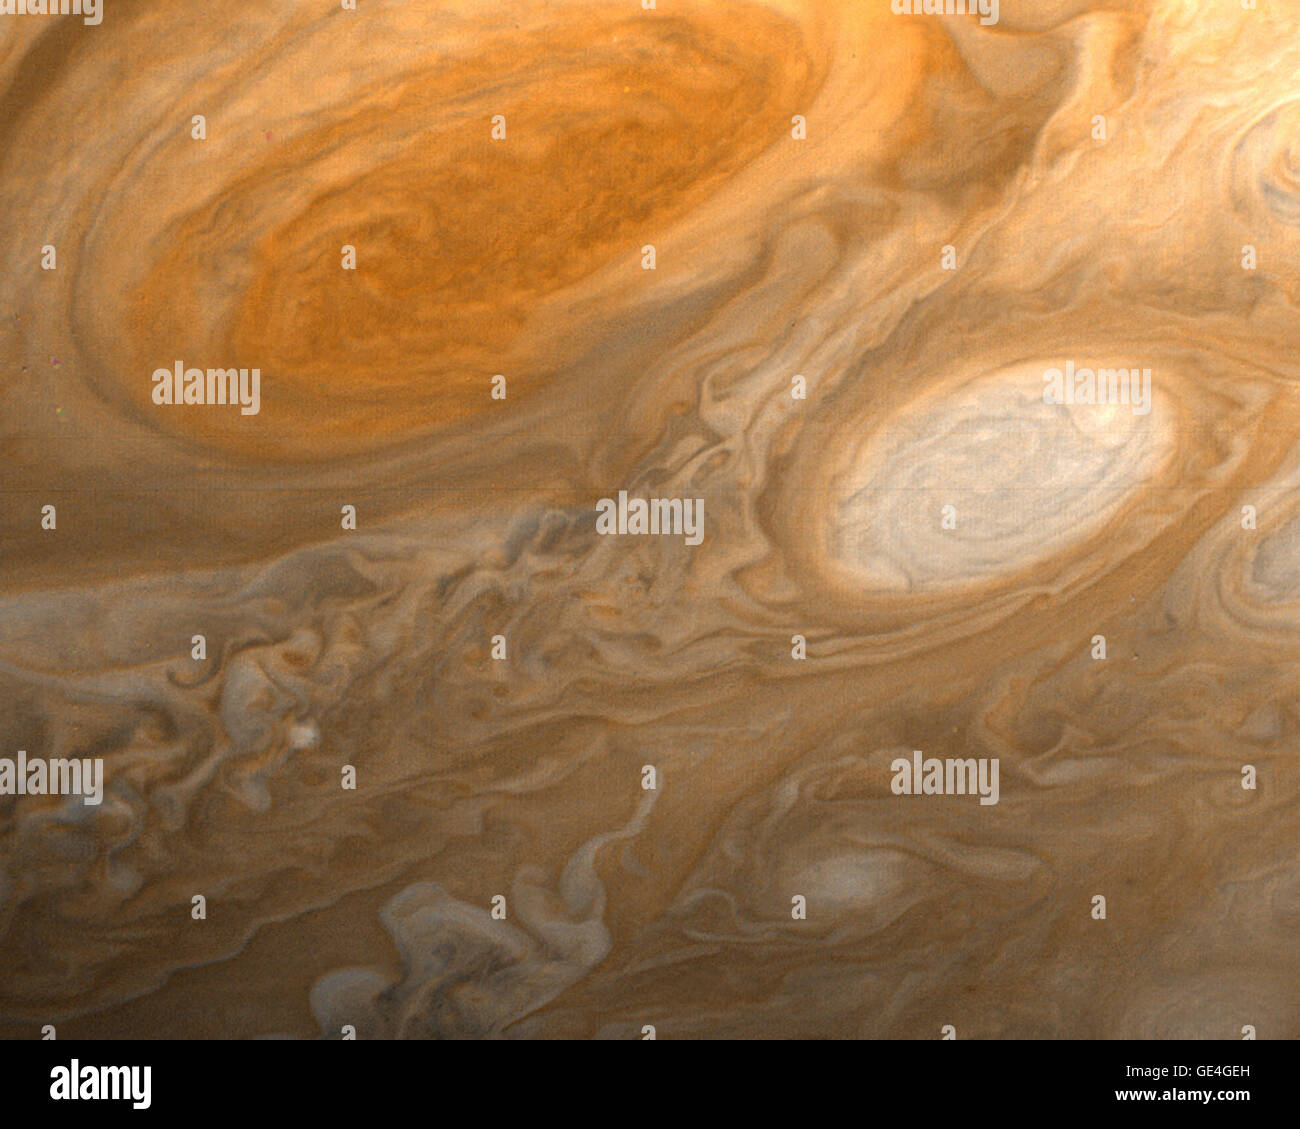 (March 1, 1979) As Voyager 1 flew by Jupiter, it captured this photo of the Great Red Spot. The Great Red Spot is an anti-cyclonic (high- pressure) storm on Jupiter that can be likened to the worst hurricanes on Earth. An ancient storm, it is so large that three Earths could fit inside it. This photo, and others of Jupiter, allowed scientists to see different colors in clouds around the Great Red Spot which imply that the clouds swirl around the spot (going counter-clockwise) at varying altitudes. The Great Red Spot had been observed from Earth for hundreds of years, yet never before with this Stock Photo